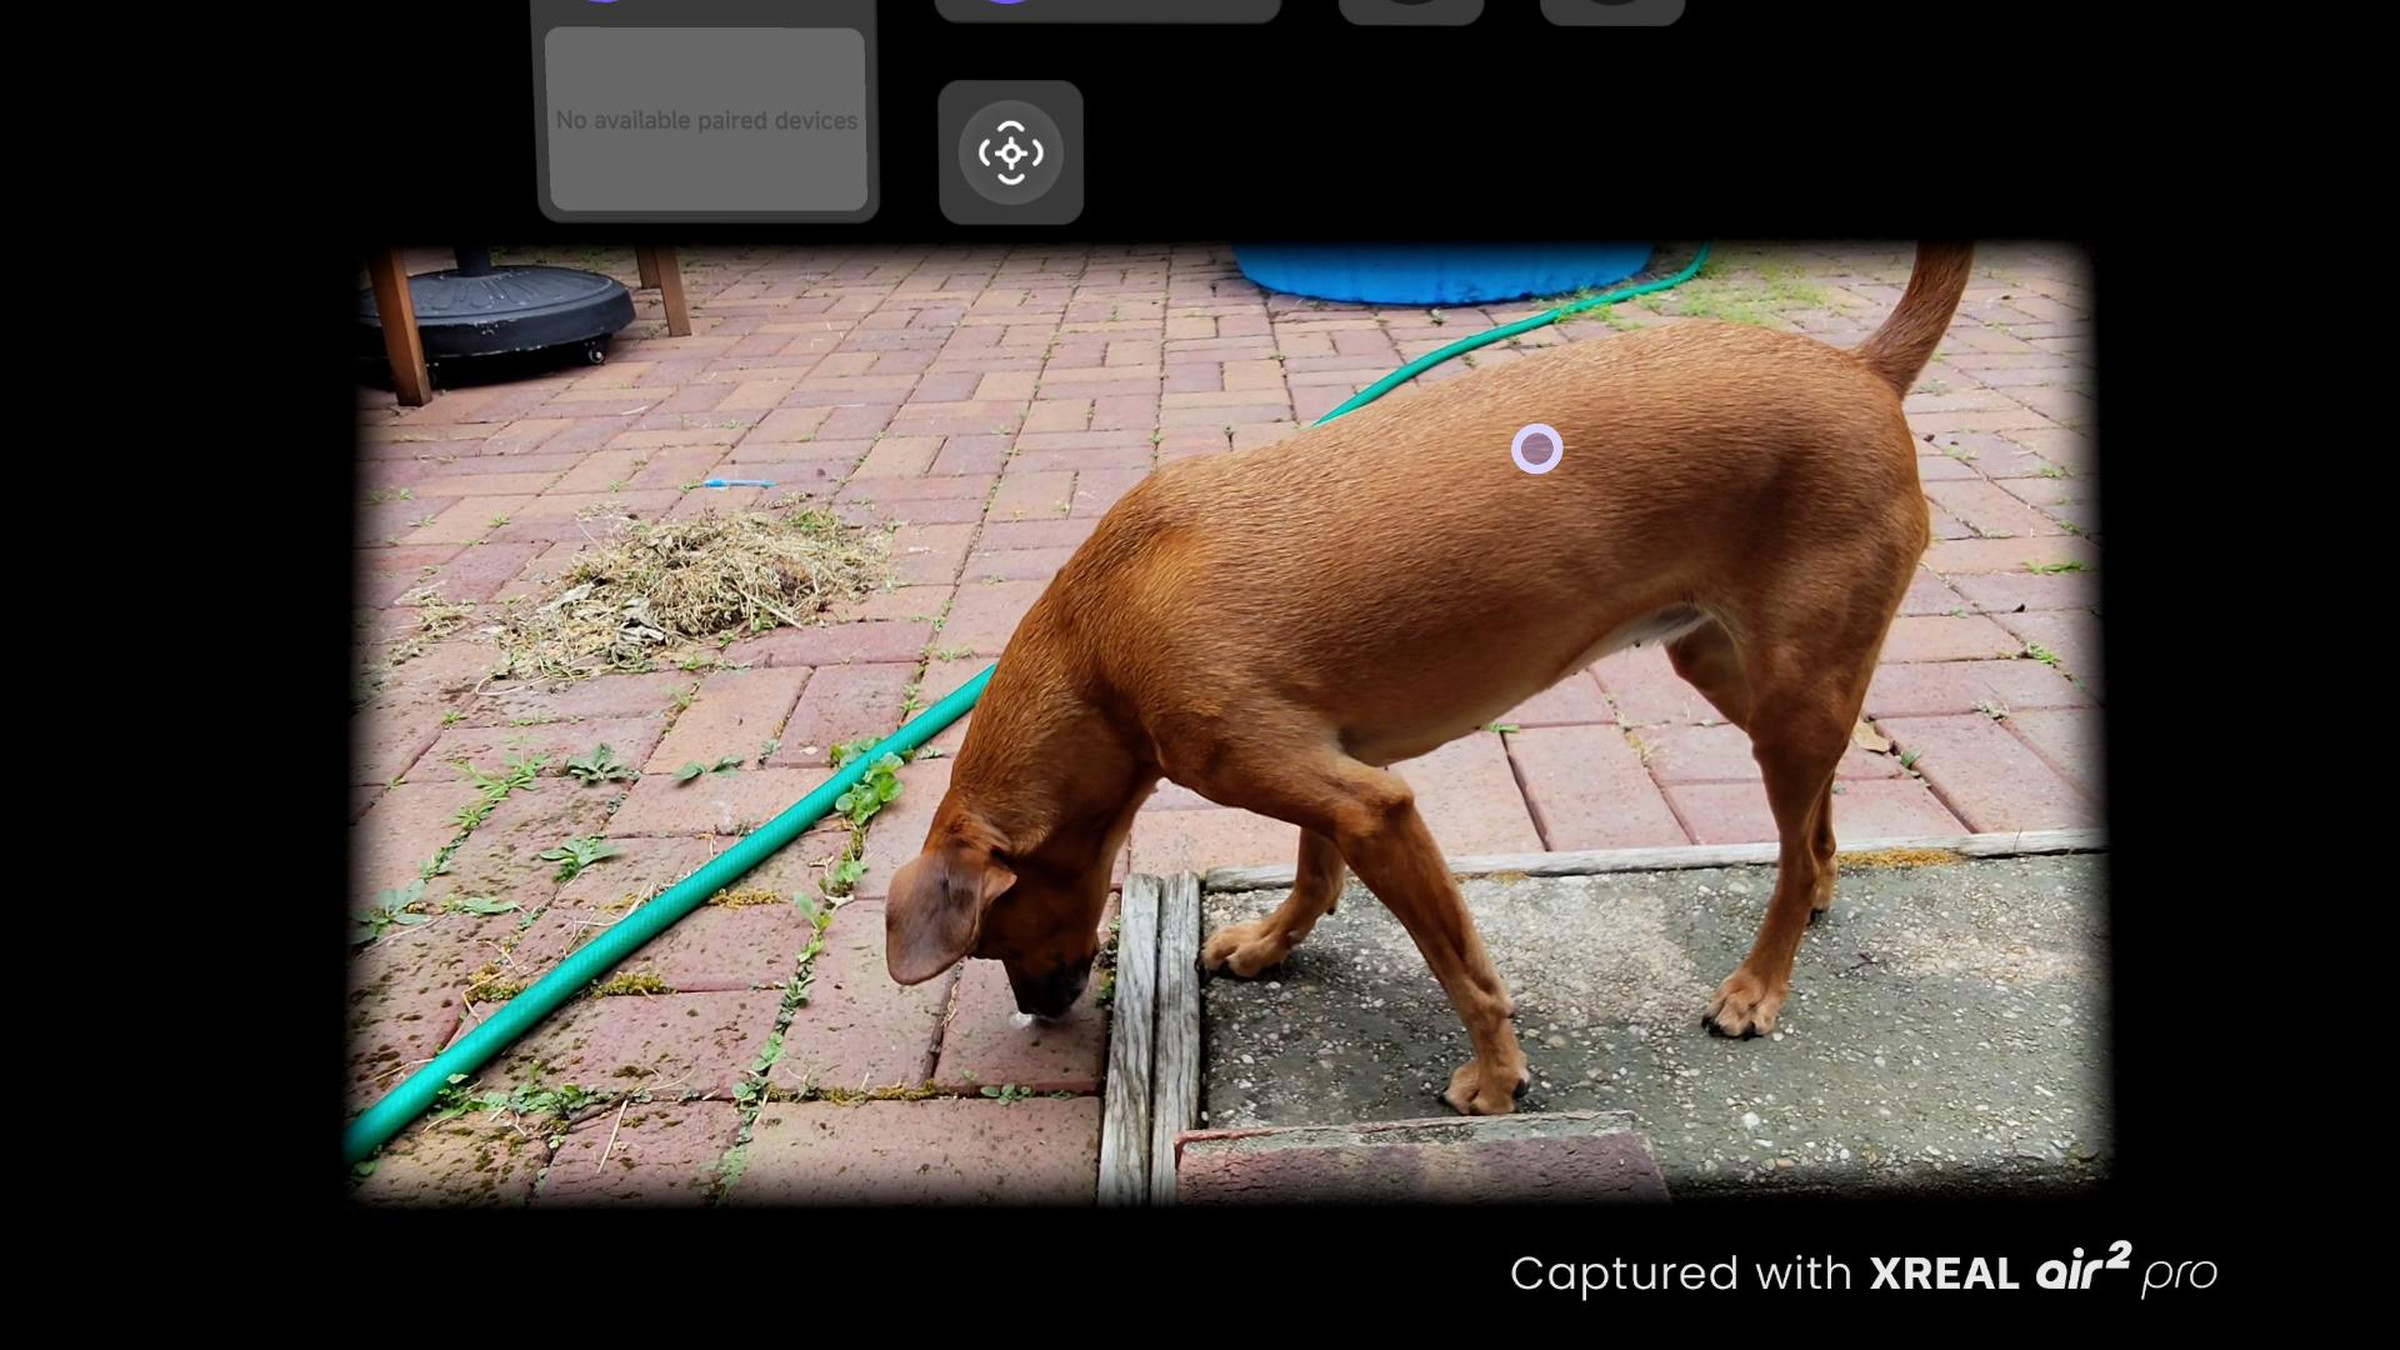 A still image of a dog, in a video, in an AR space.